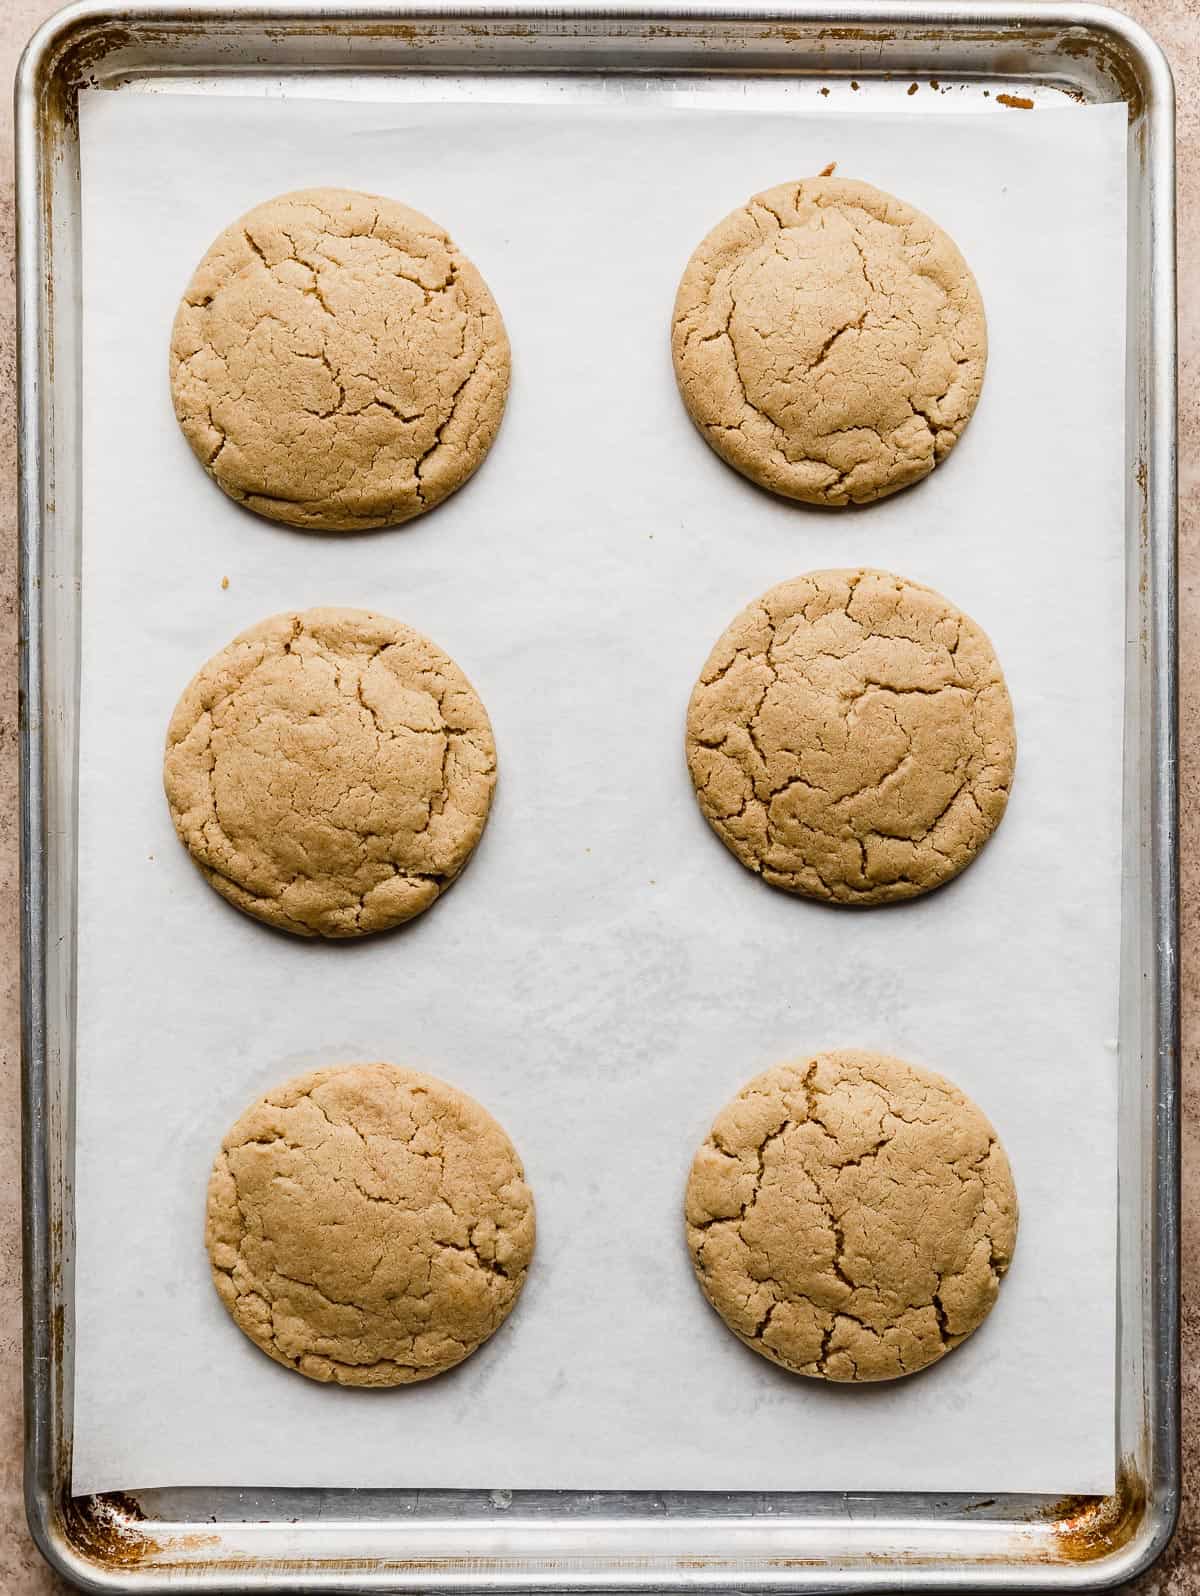 Six baked peanut butter cookies on a white parchment lined baking sheet.